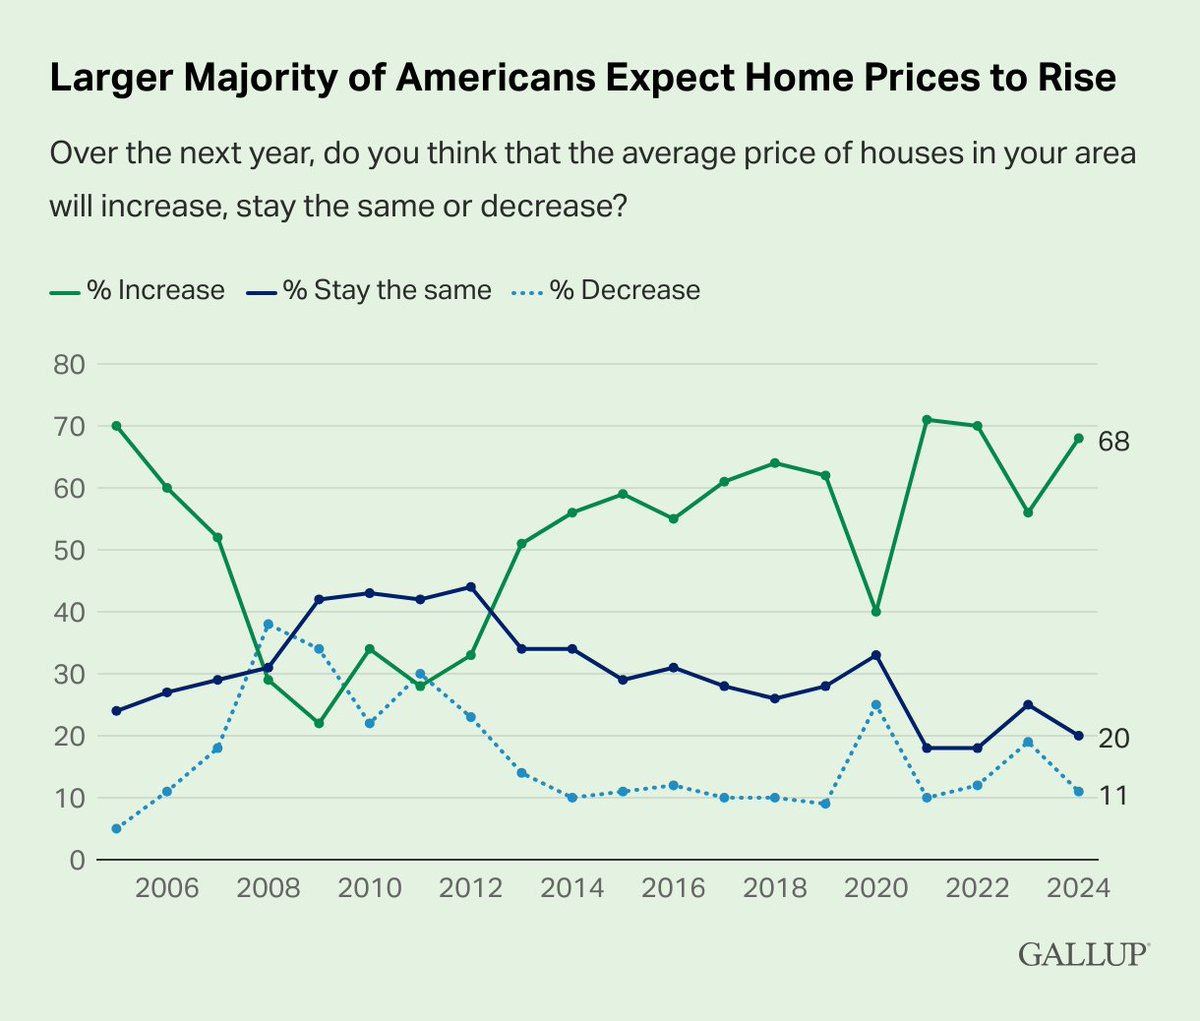 Sixty-eight percent of U.S. adults expect home prices in their local area to increase in the coming year. New data: on.gallup.com/3UTrSs8